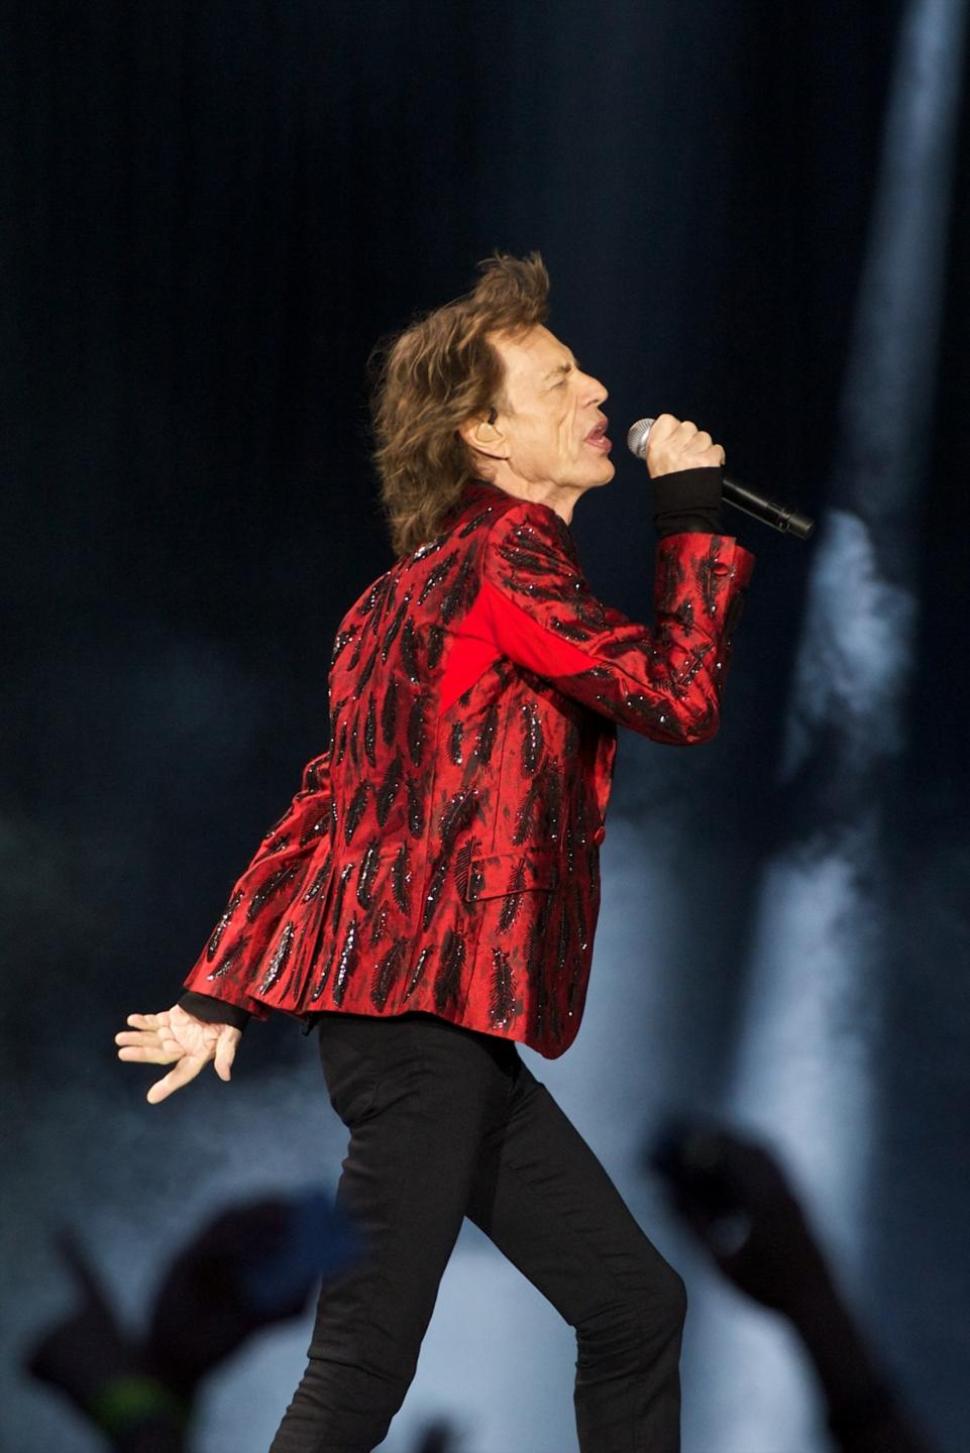 After Bono's news, what's the reason behind Mick Jagger's moves?